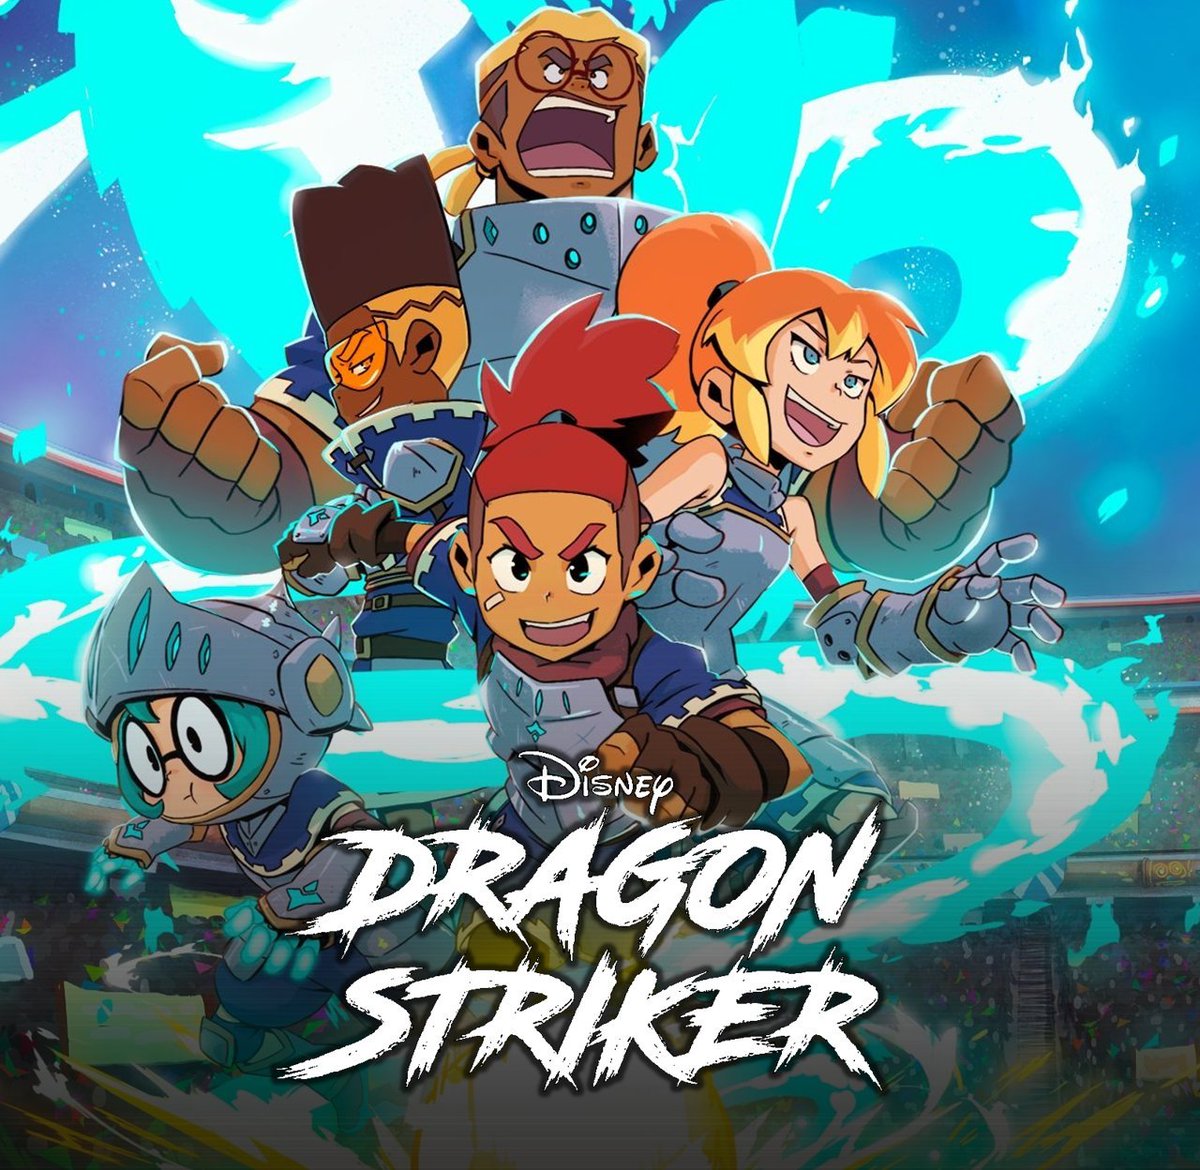 Let's just say that Disney+ now has two sports themed animated shows, one by their American division and one by their European division  

FANTASY SPORTS - Disney Television Animation DRAGON STRIKER - Disney Europe Animation  

#FantasySports #DragonStriker